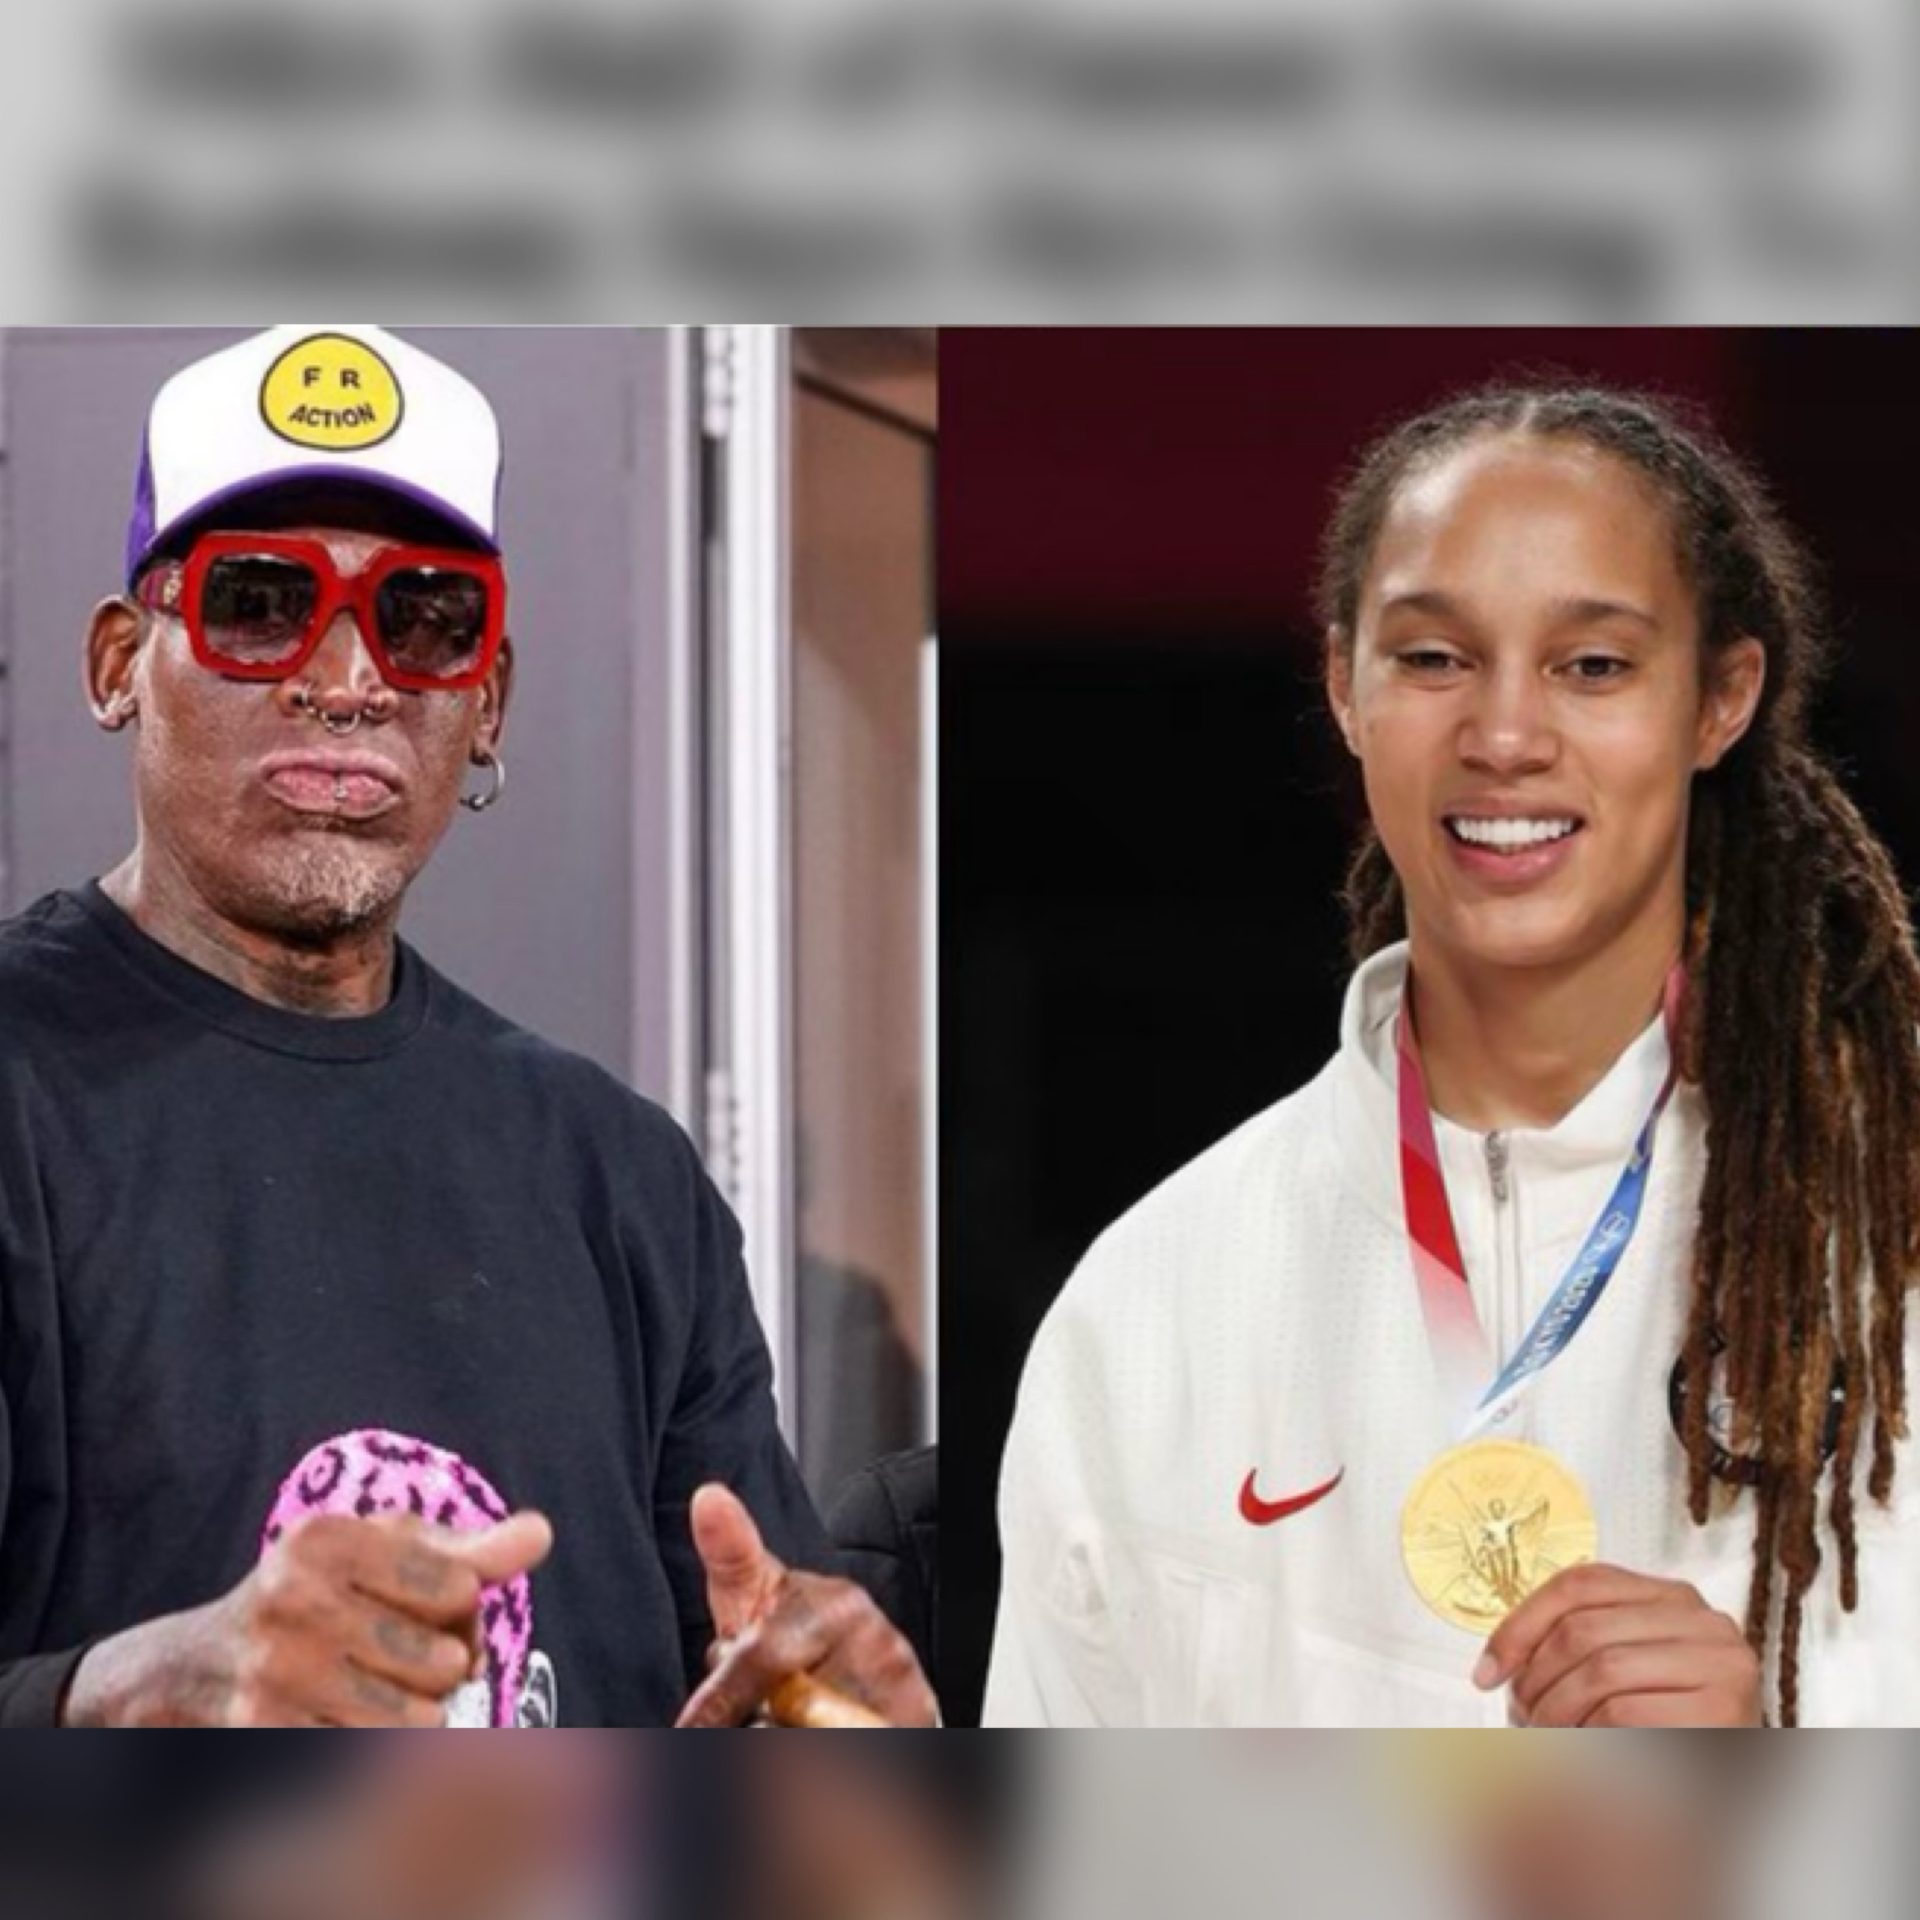 Dennis Rodman No Longer Plans To Go To Russia To Assist Brittney Griner After The U.S. Advised The Trip Could Hinder Negotiations